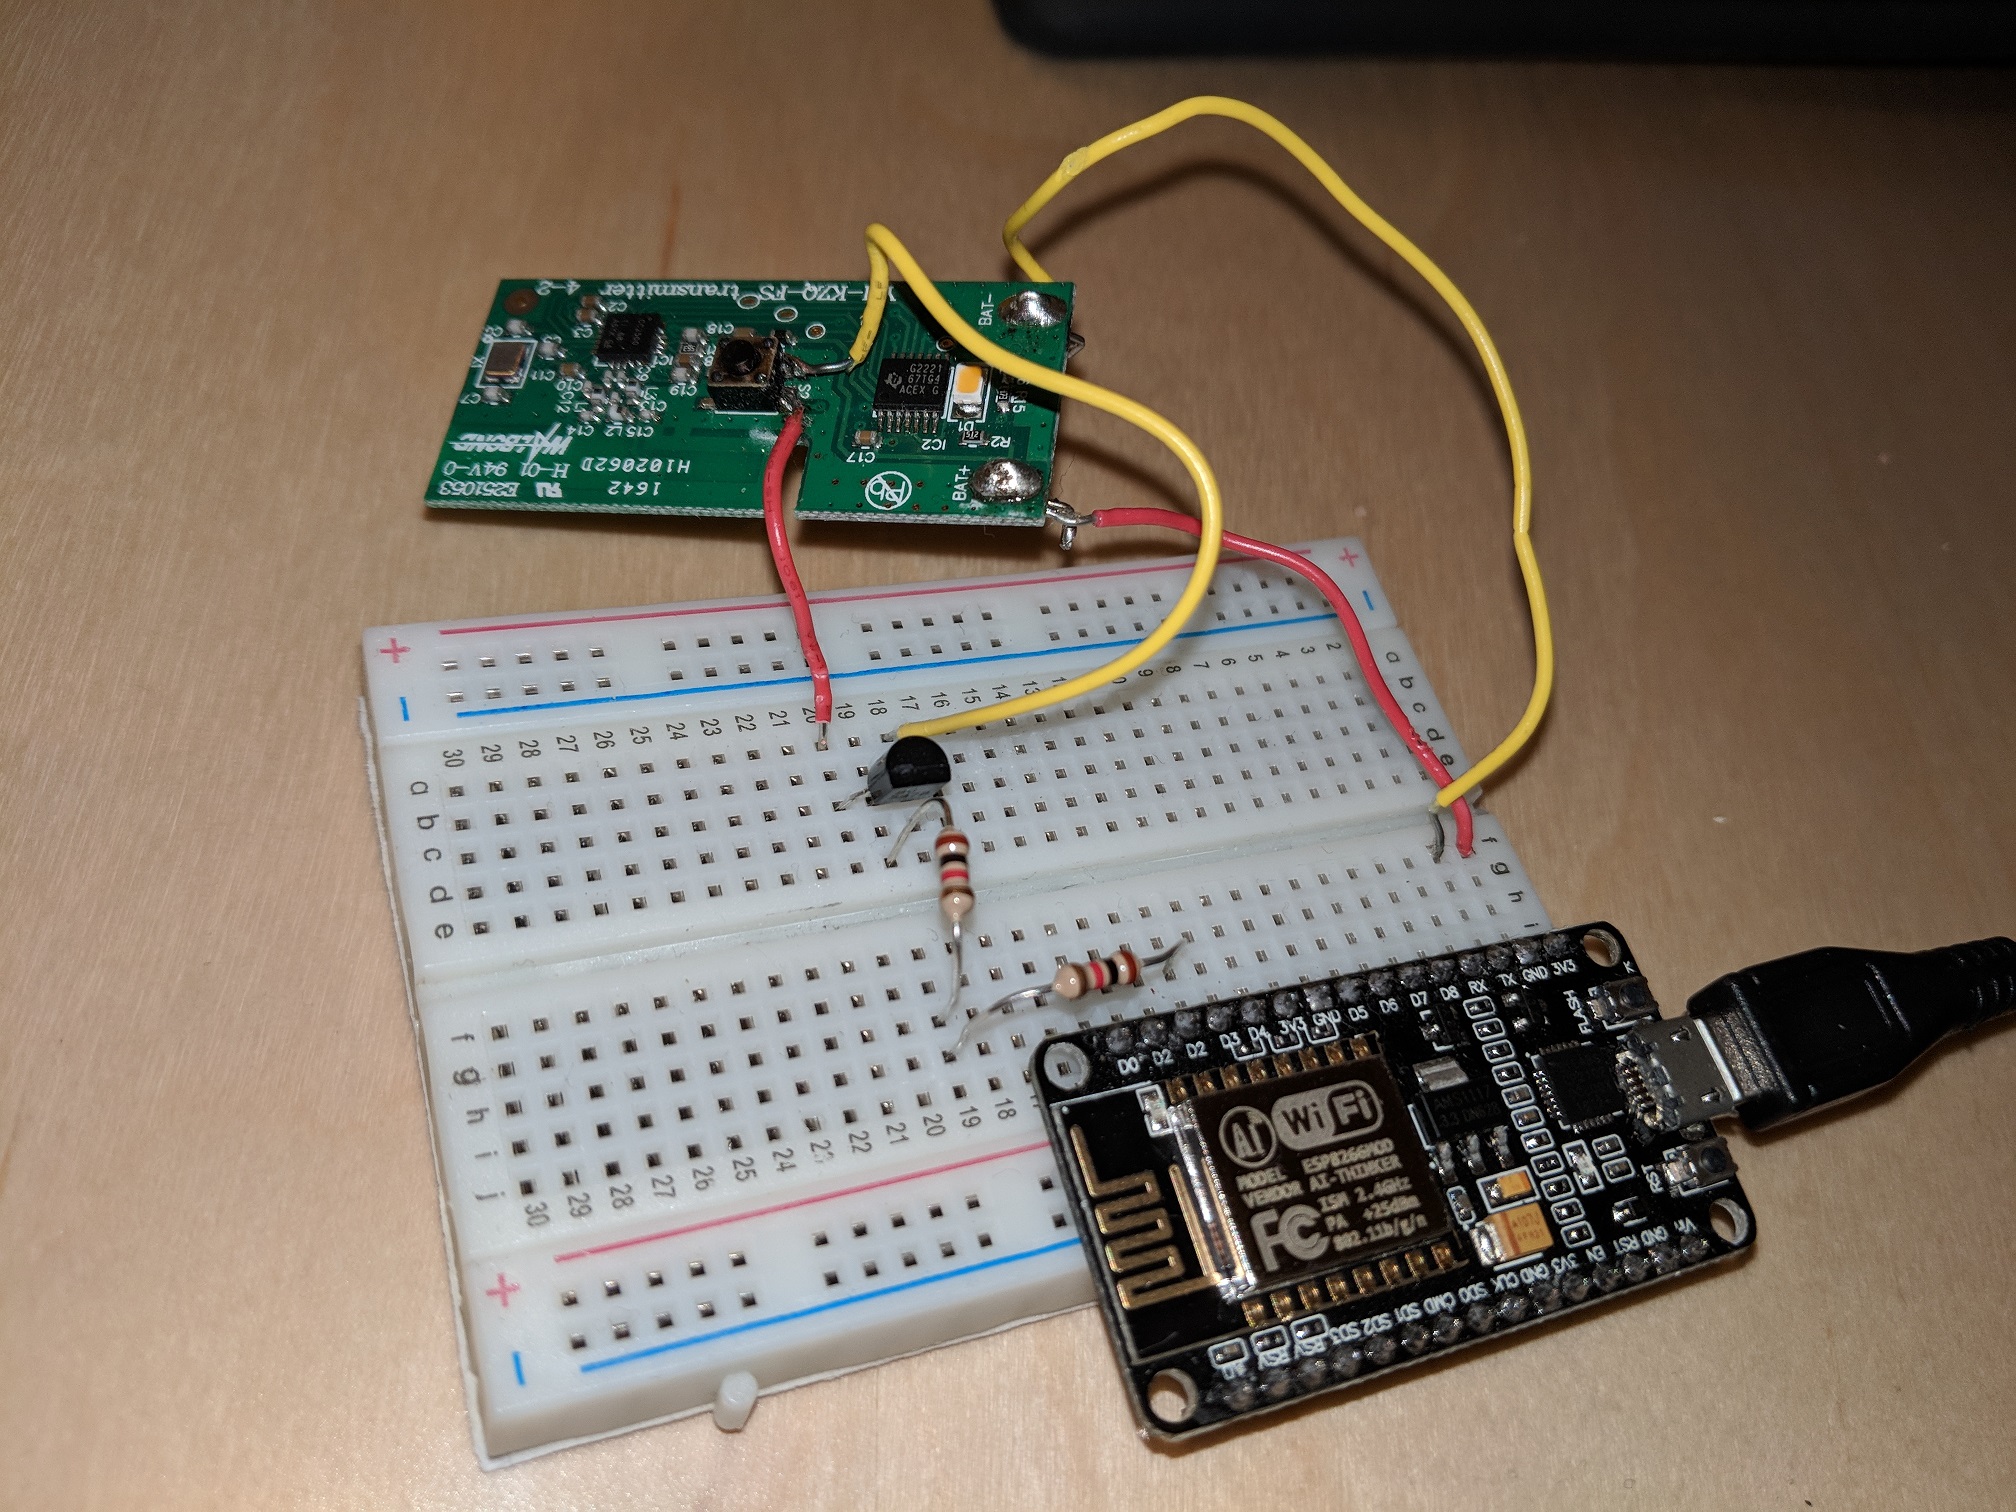 Ansluta connected to ESP8266 on the breadboard